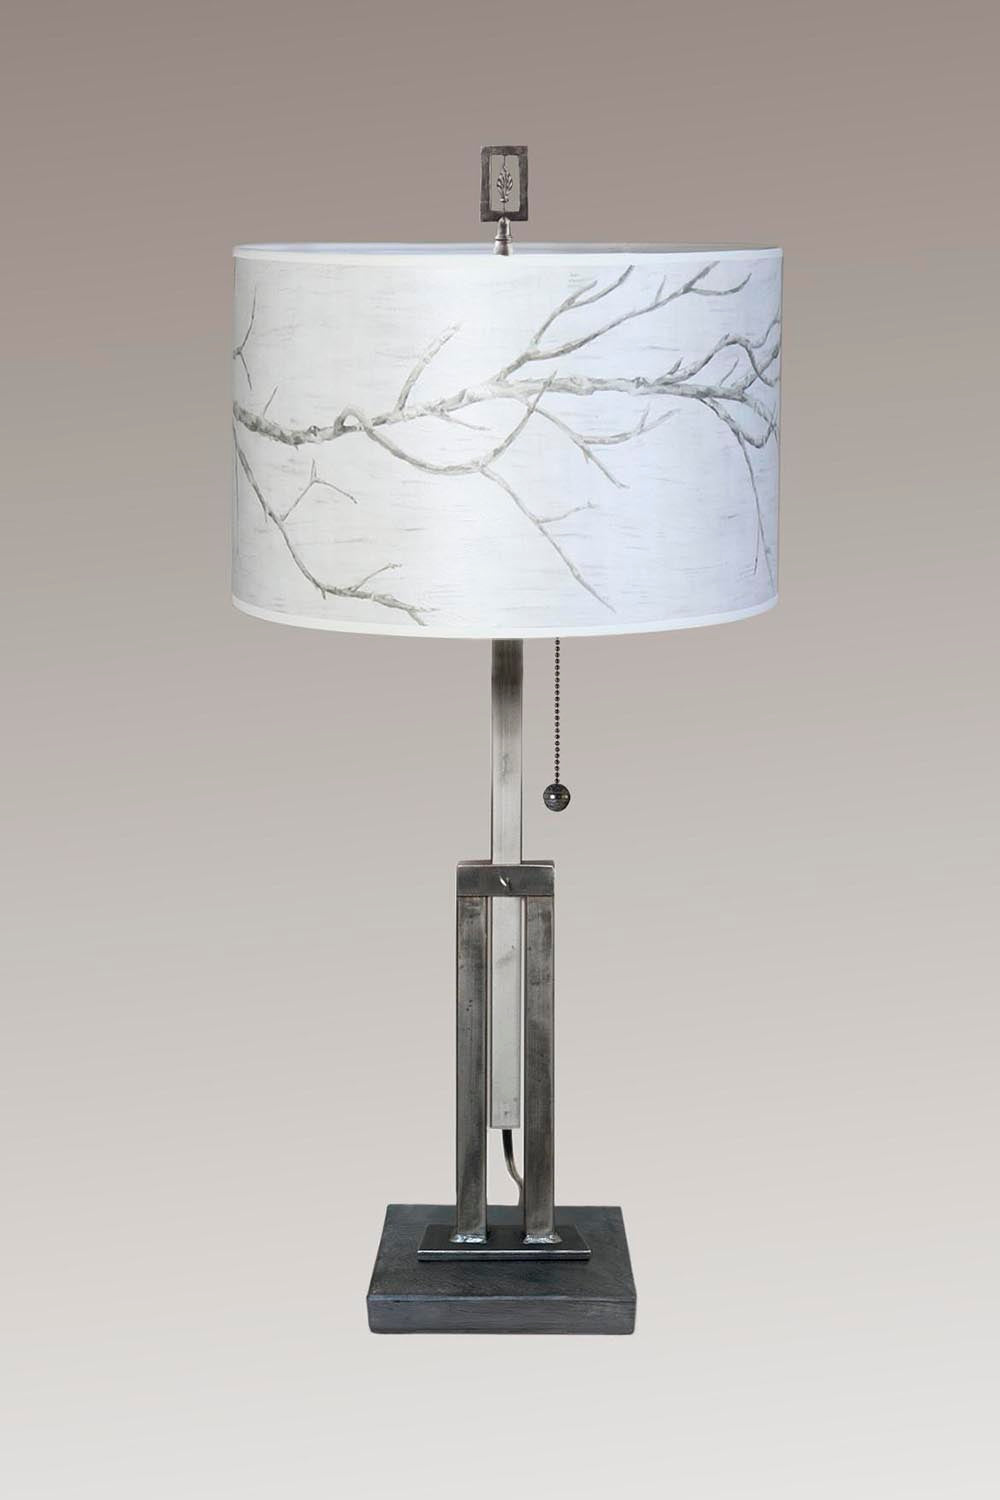 Janna Ugone & Co Table Lamps Adjustable-Height Steel Table Lamp with Large Drum Shade in Sweeping Branch